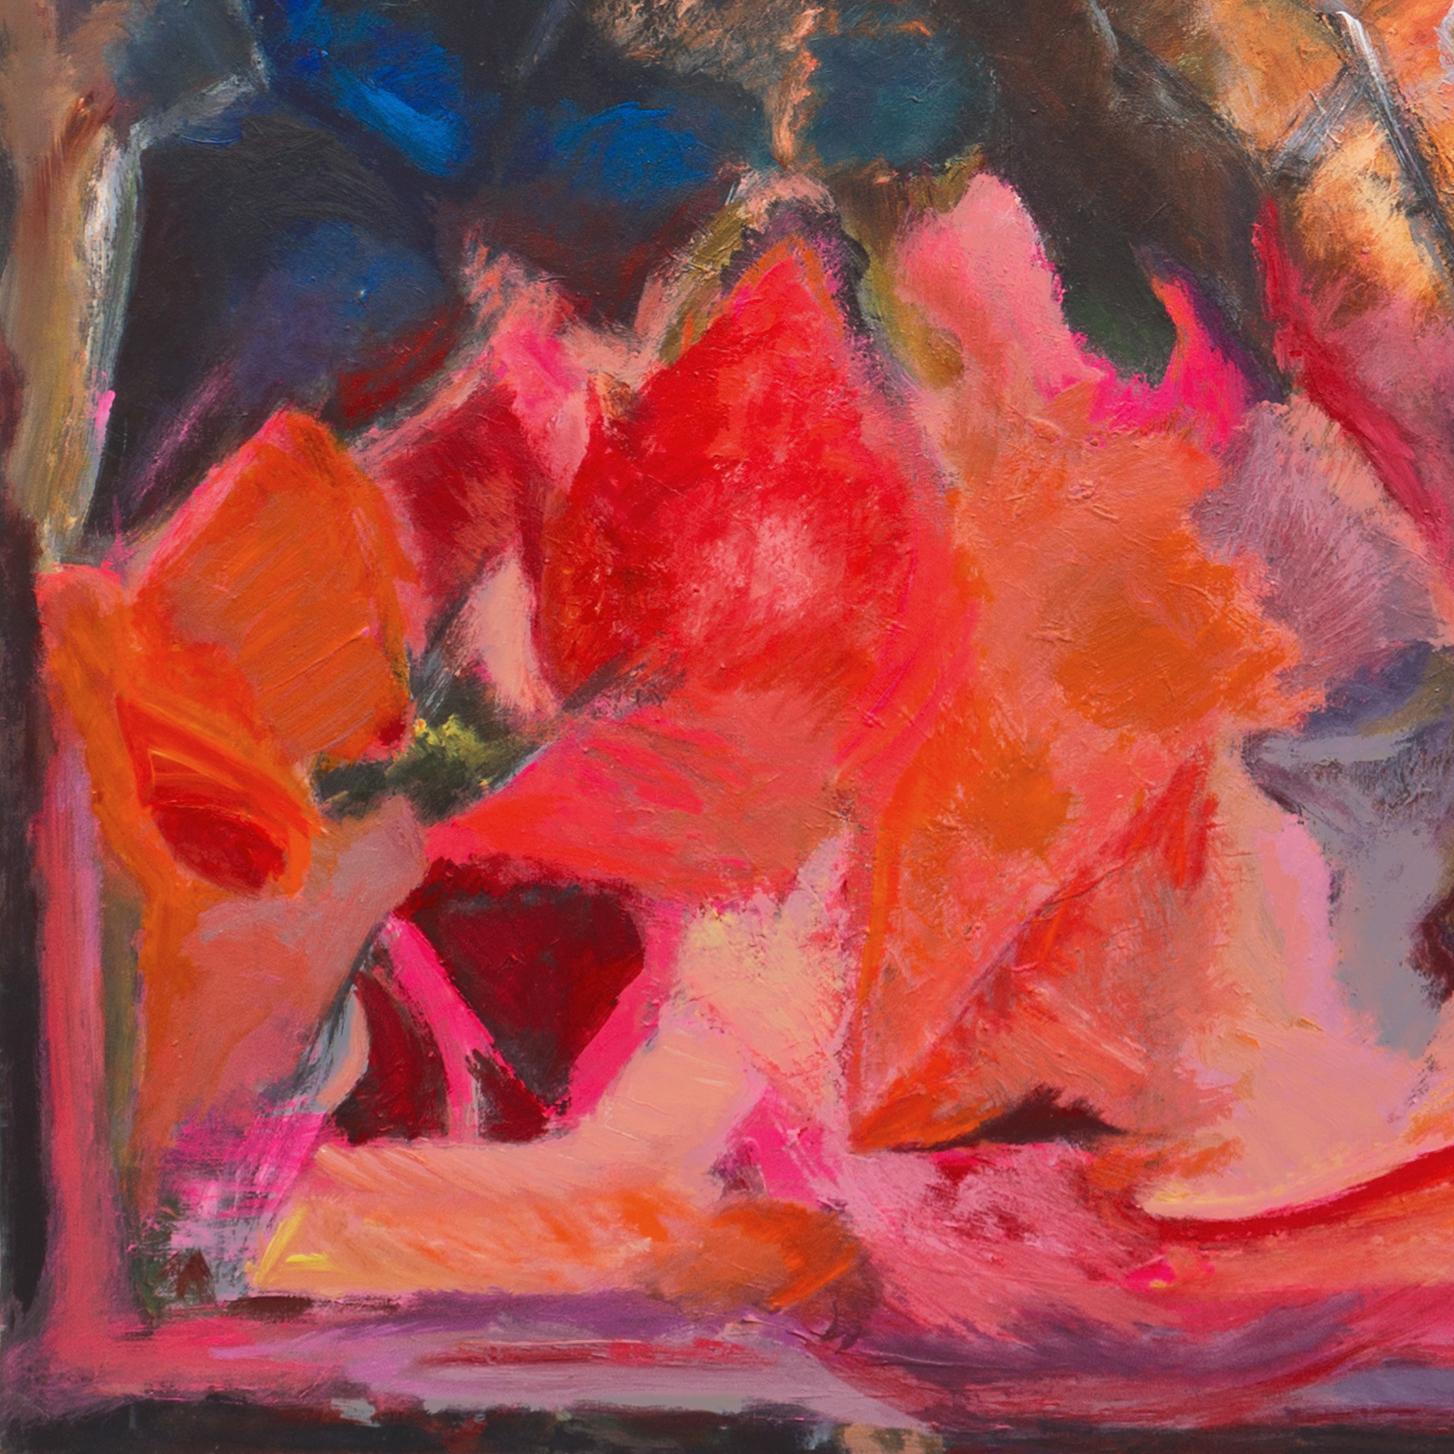 Signed twice, verso, on stretcher 'Marsha Straus' for Marsha Rogow Strauss (American, 1944-2008) and painted circa 1995.

A substantial and vibrant oil abstract comprising massed, overlapping and adjacent forms in shades of coral, lilac and